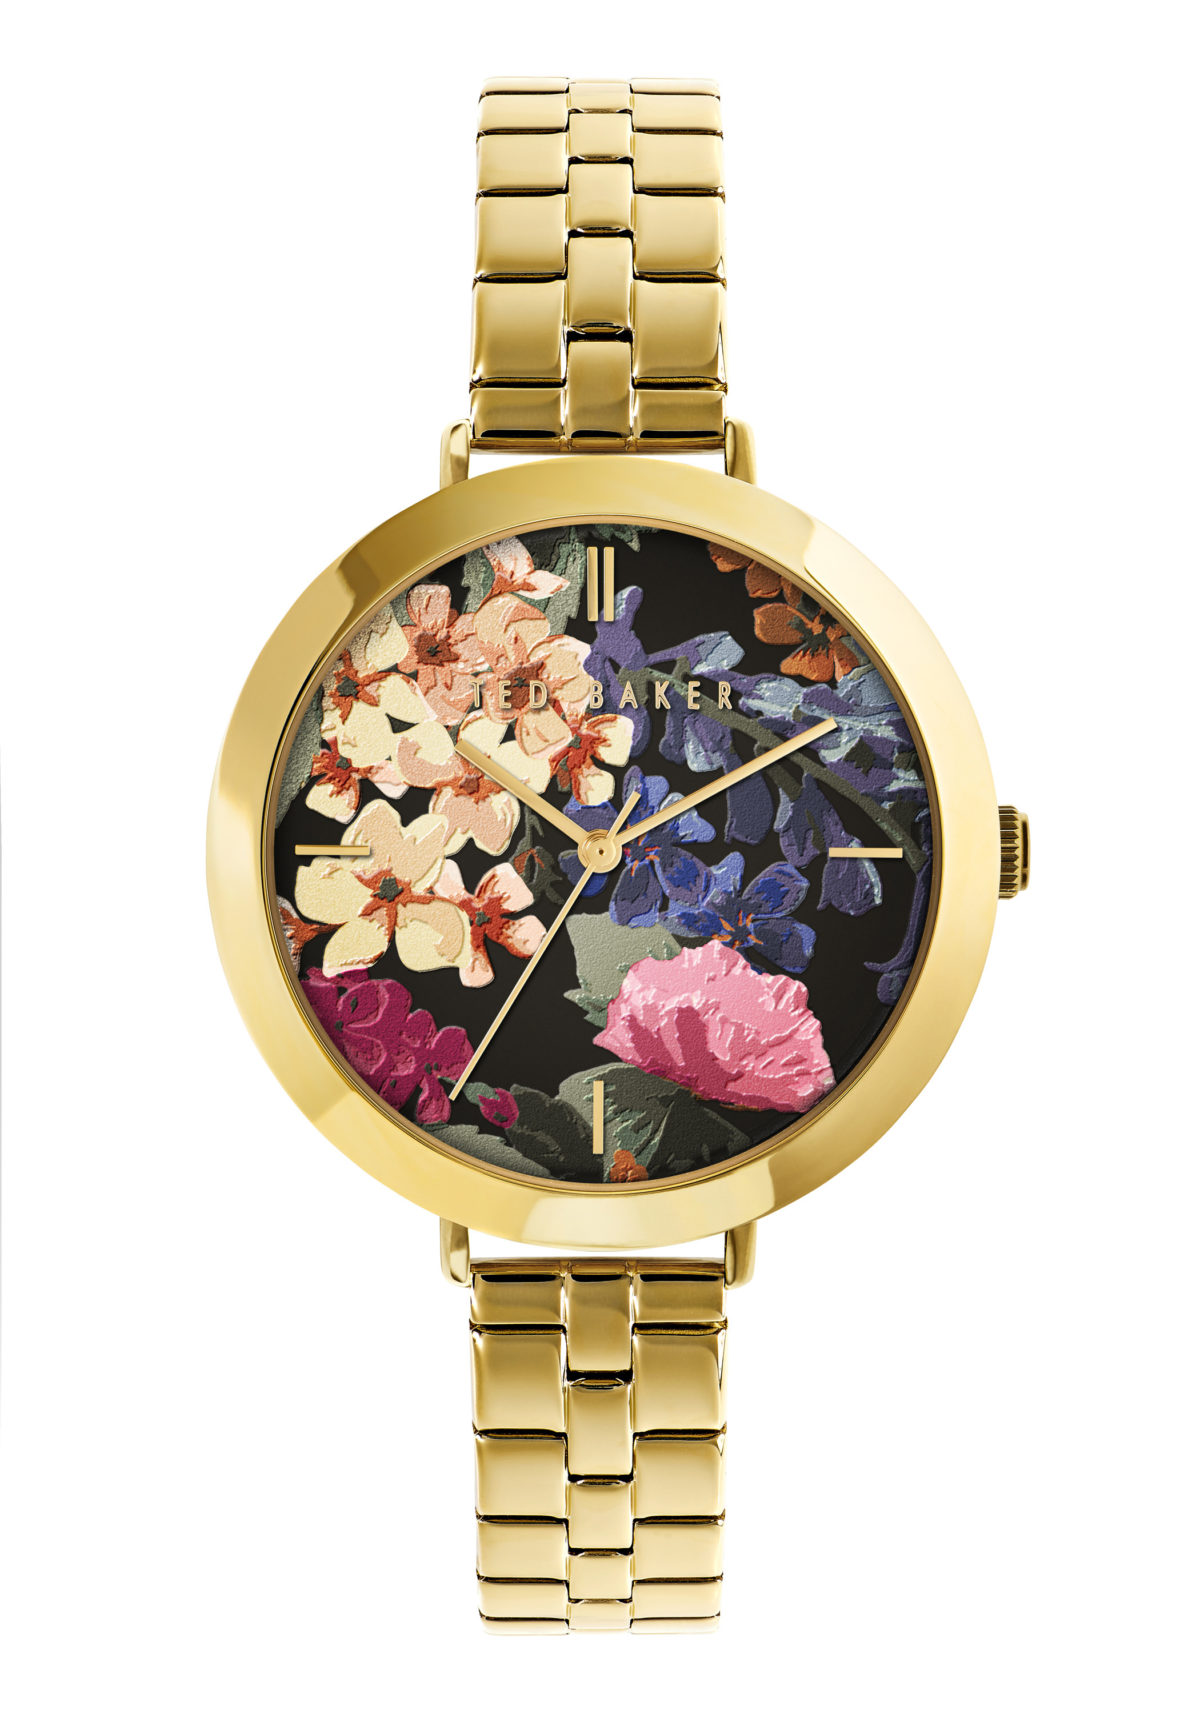 BKPAMF103 TED BAKER WATCH